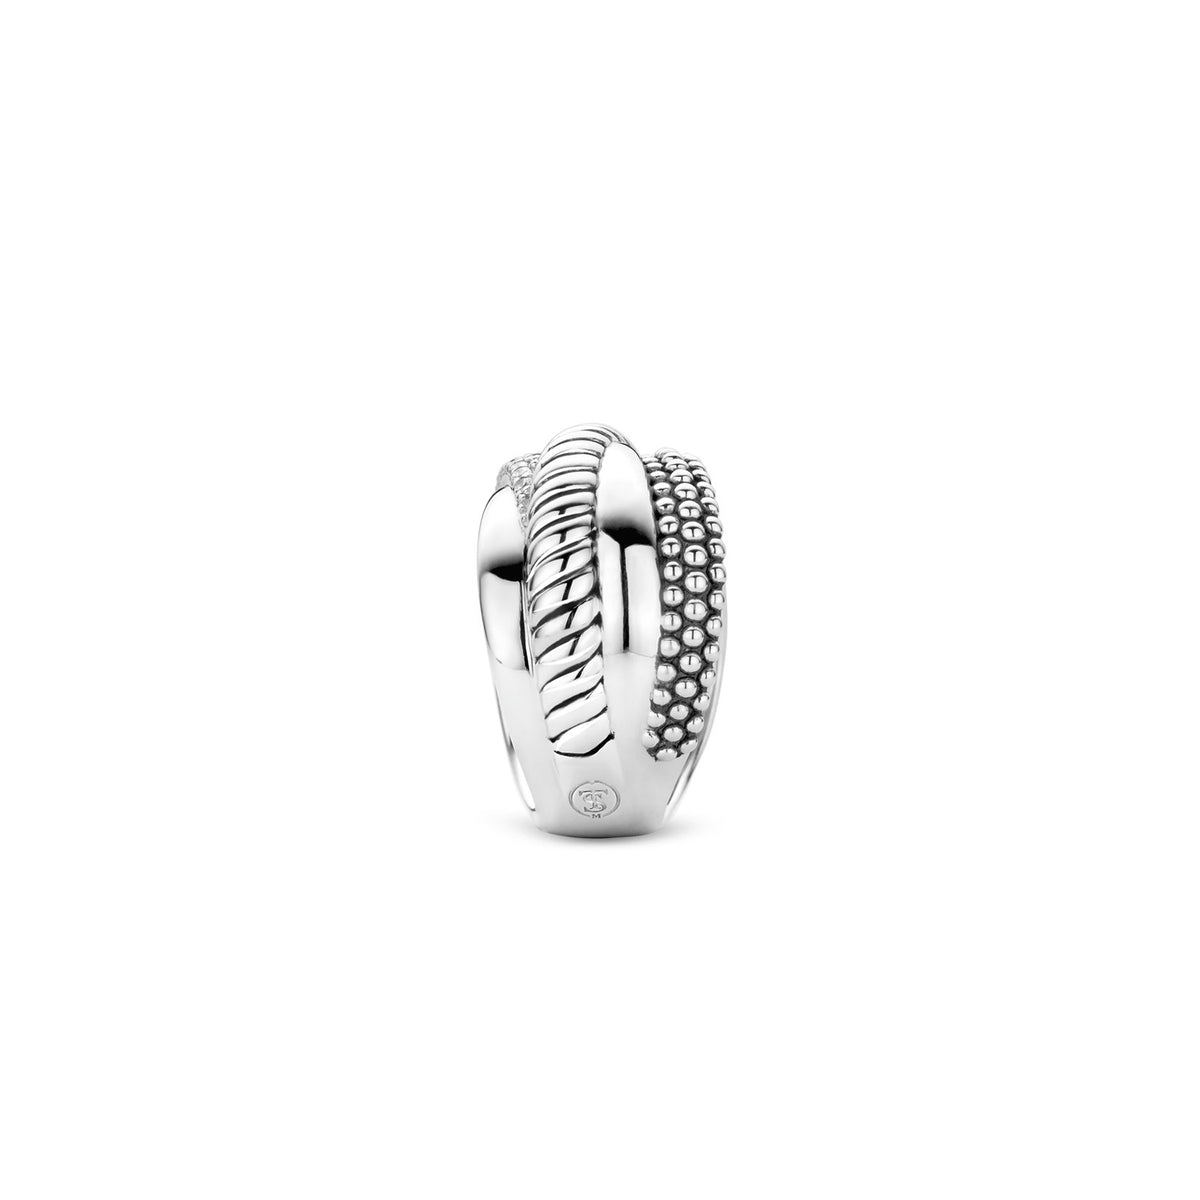 TI SENTO Sterling Silver Multi Row Ring with Cubic Zirconia